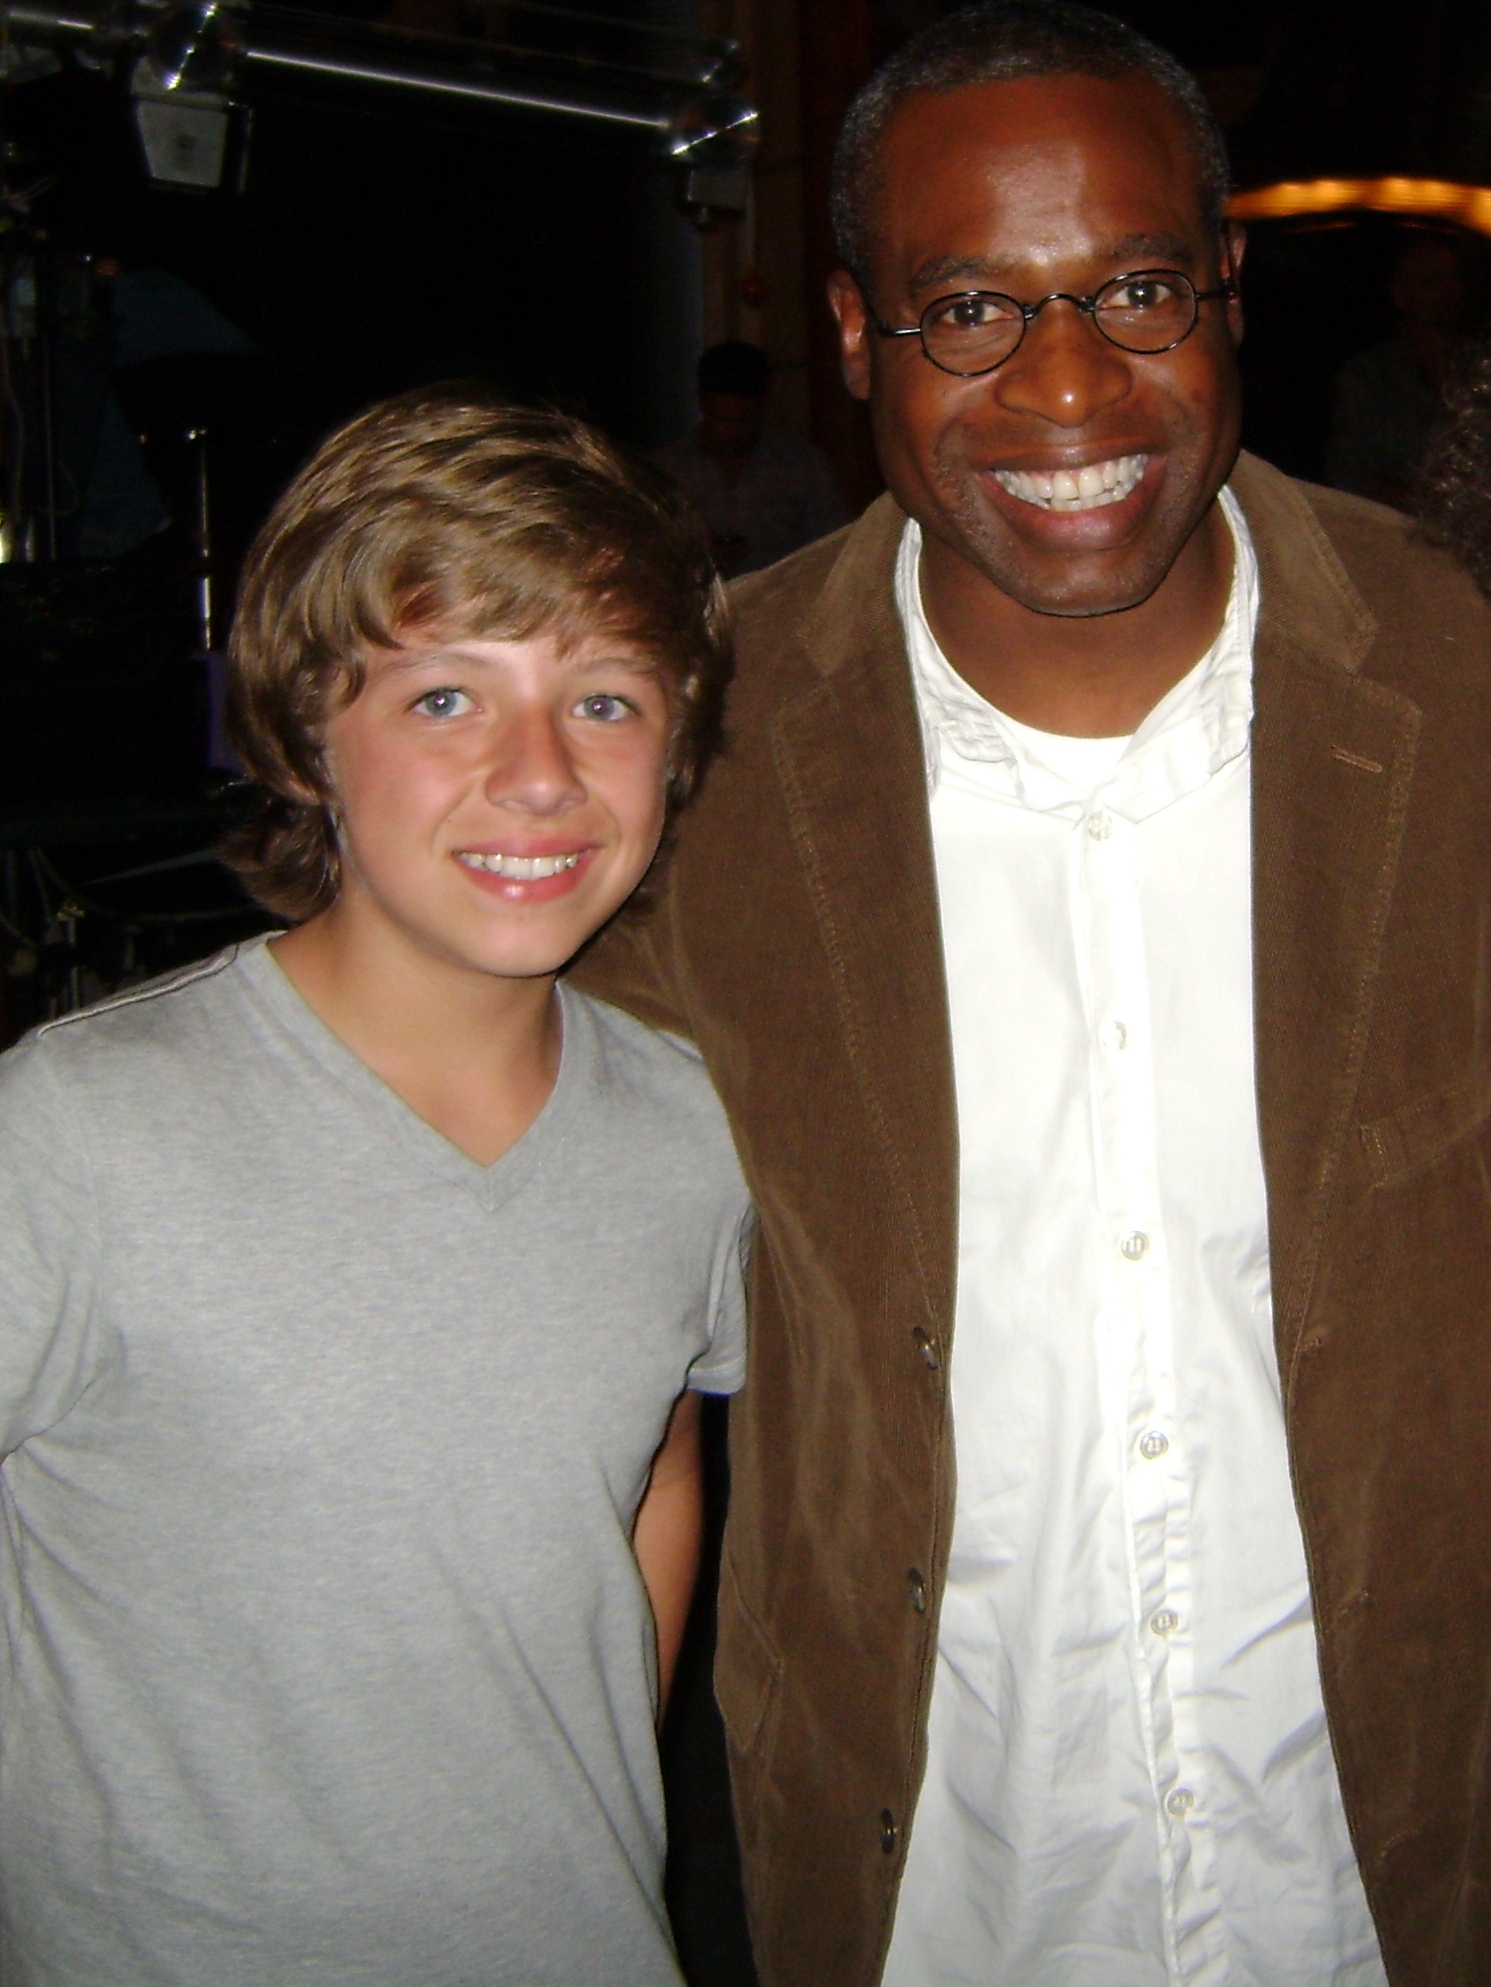 Austin with Phill Lewis - Suite Life on Deck